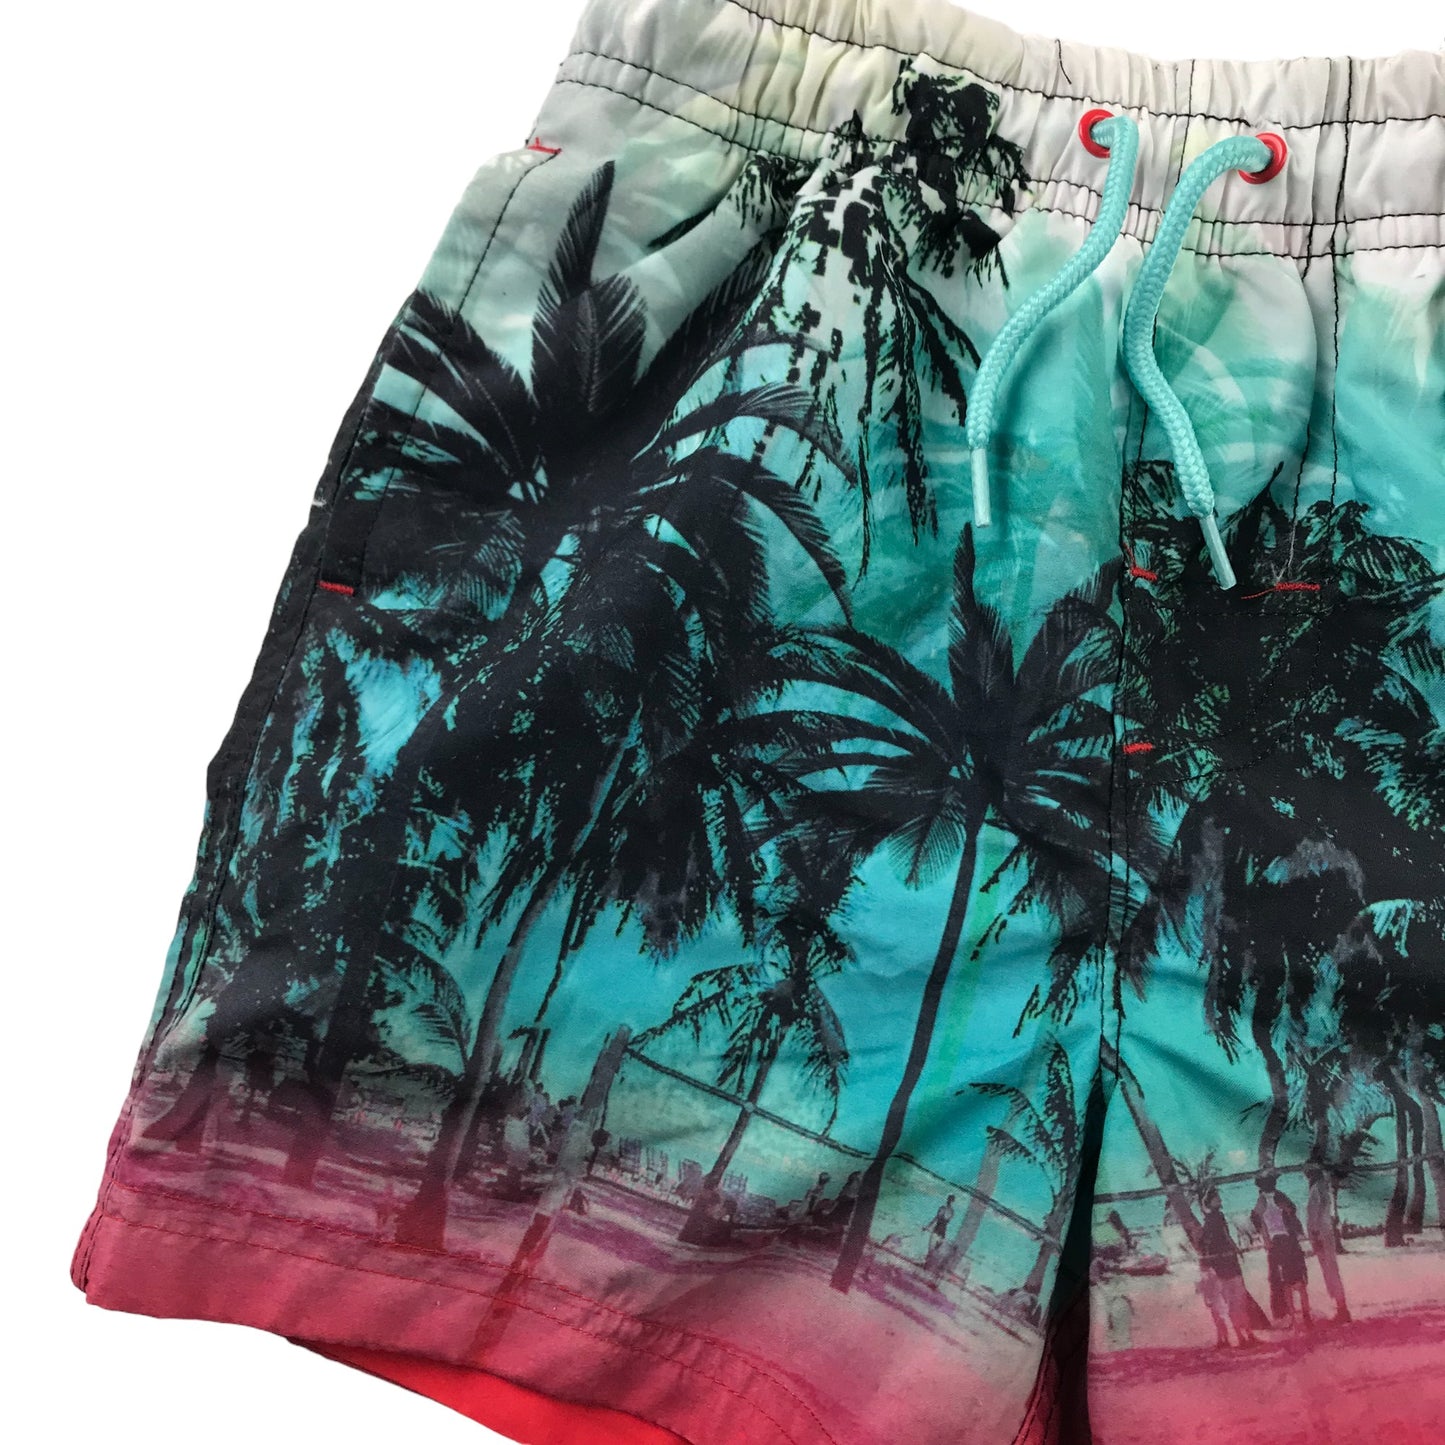 George Swim Trunks Age 5 Turquoise White and Red Gradient Palm Trees Shorts